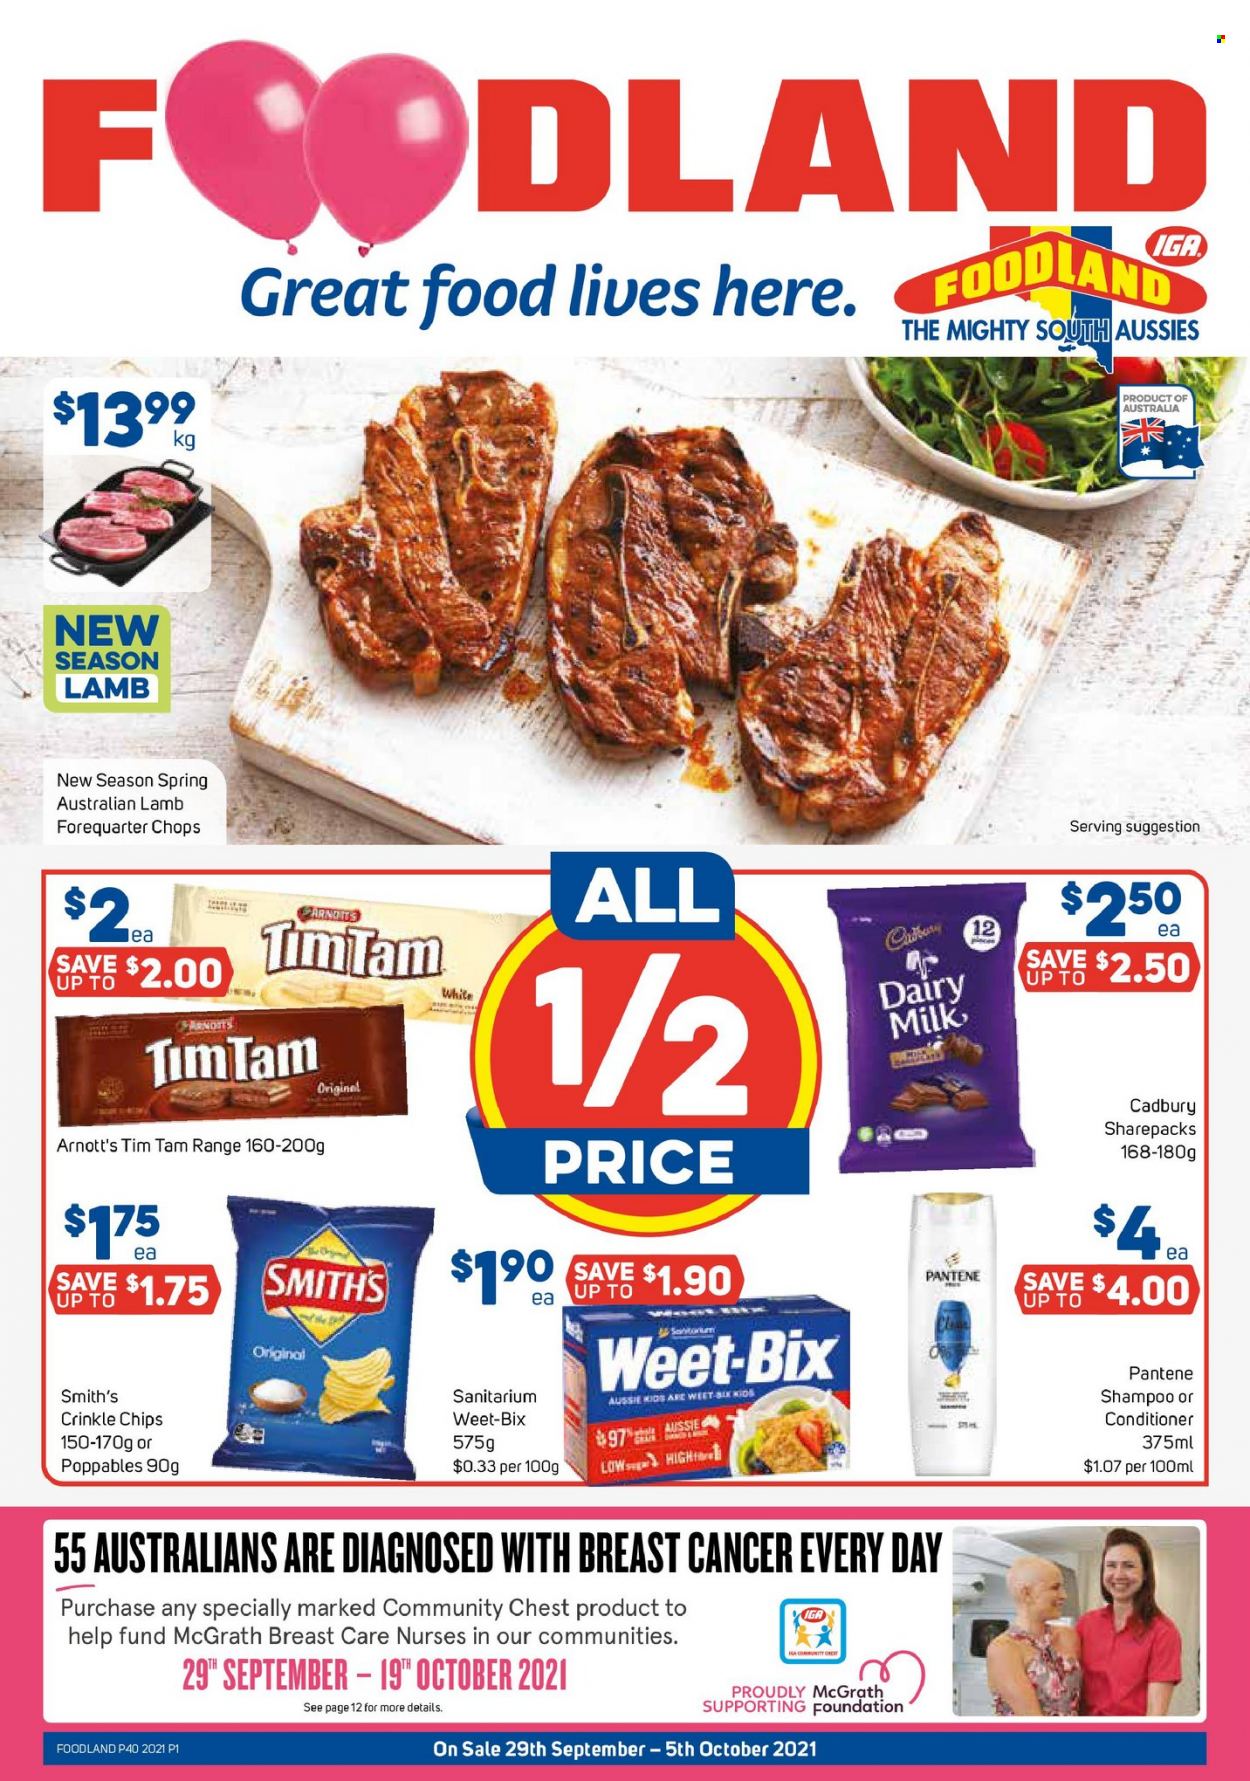 thumbnail - Foodland Catalogue - 29 Sep 2021 - 5 Oct 2021 - Sales products - crinkle fries, Tim Tam, Cadbury, Dairy Milk, chips, Smith's, Weet-Bix, shampoo, Aussie, conditioner, Pantene. Page 1.